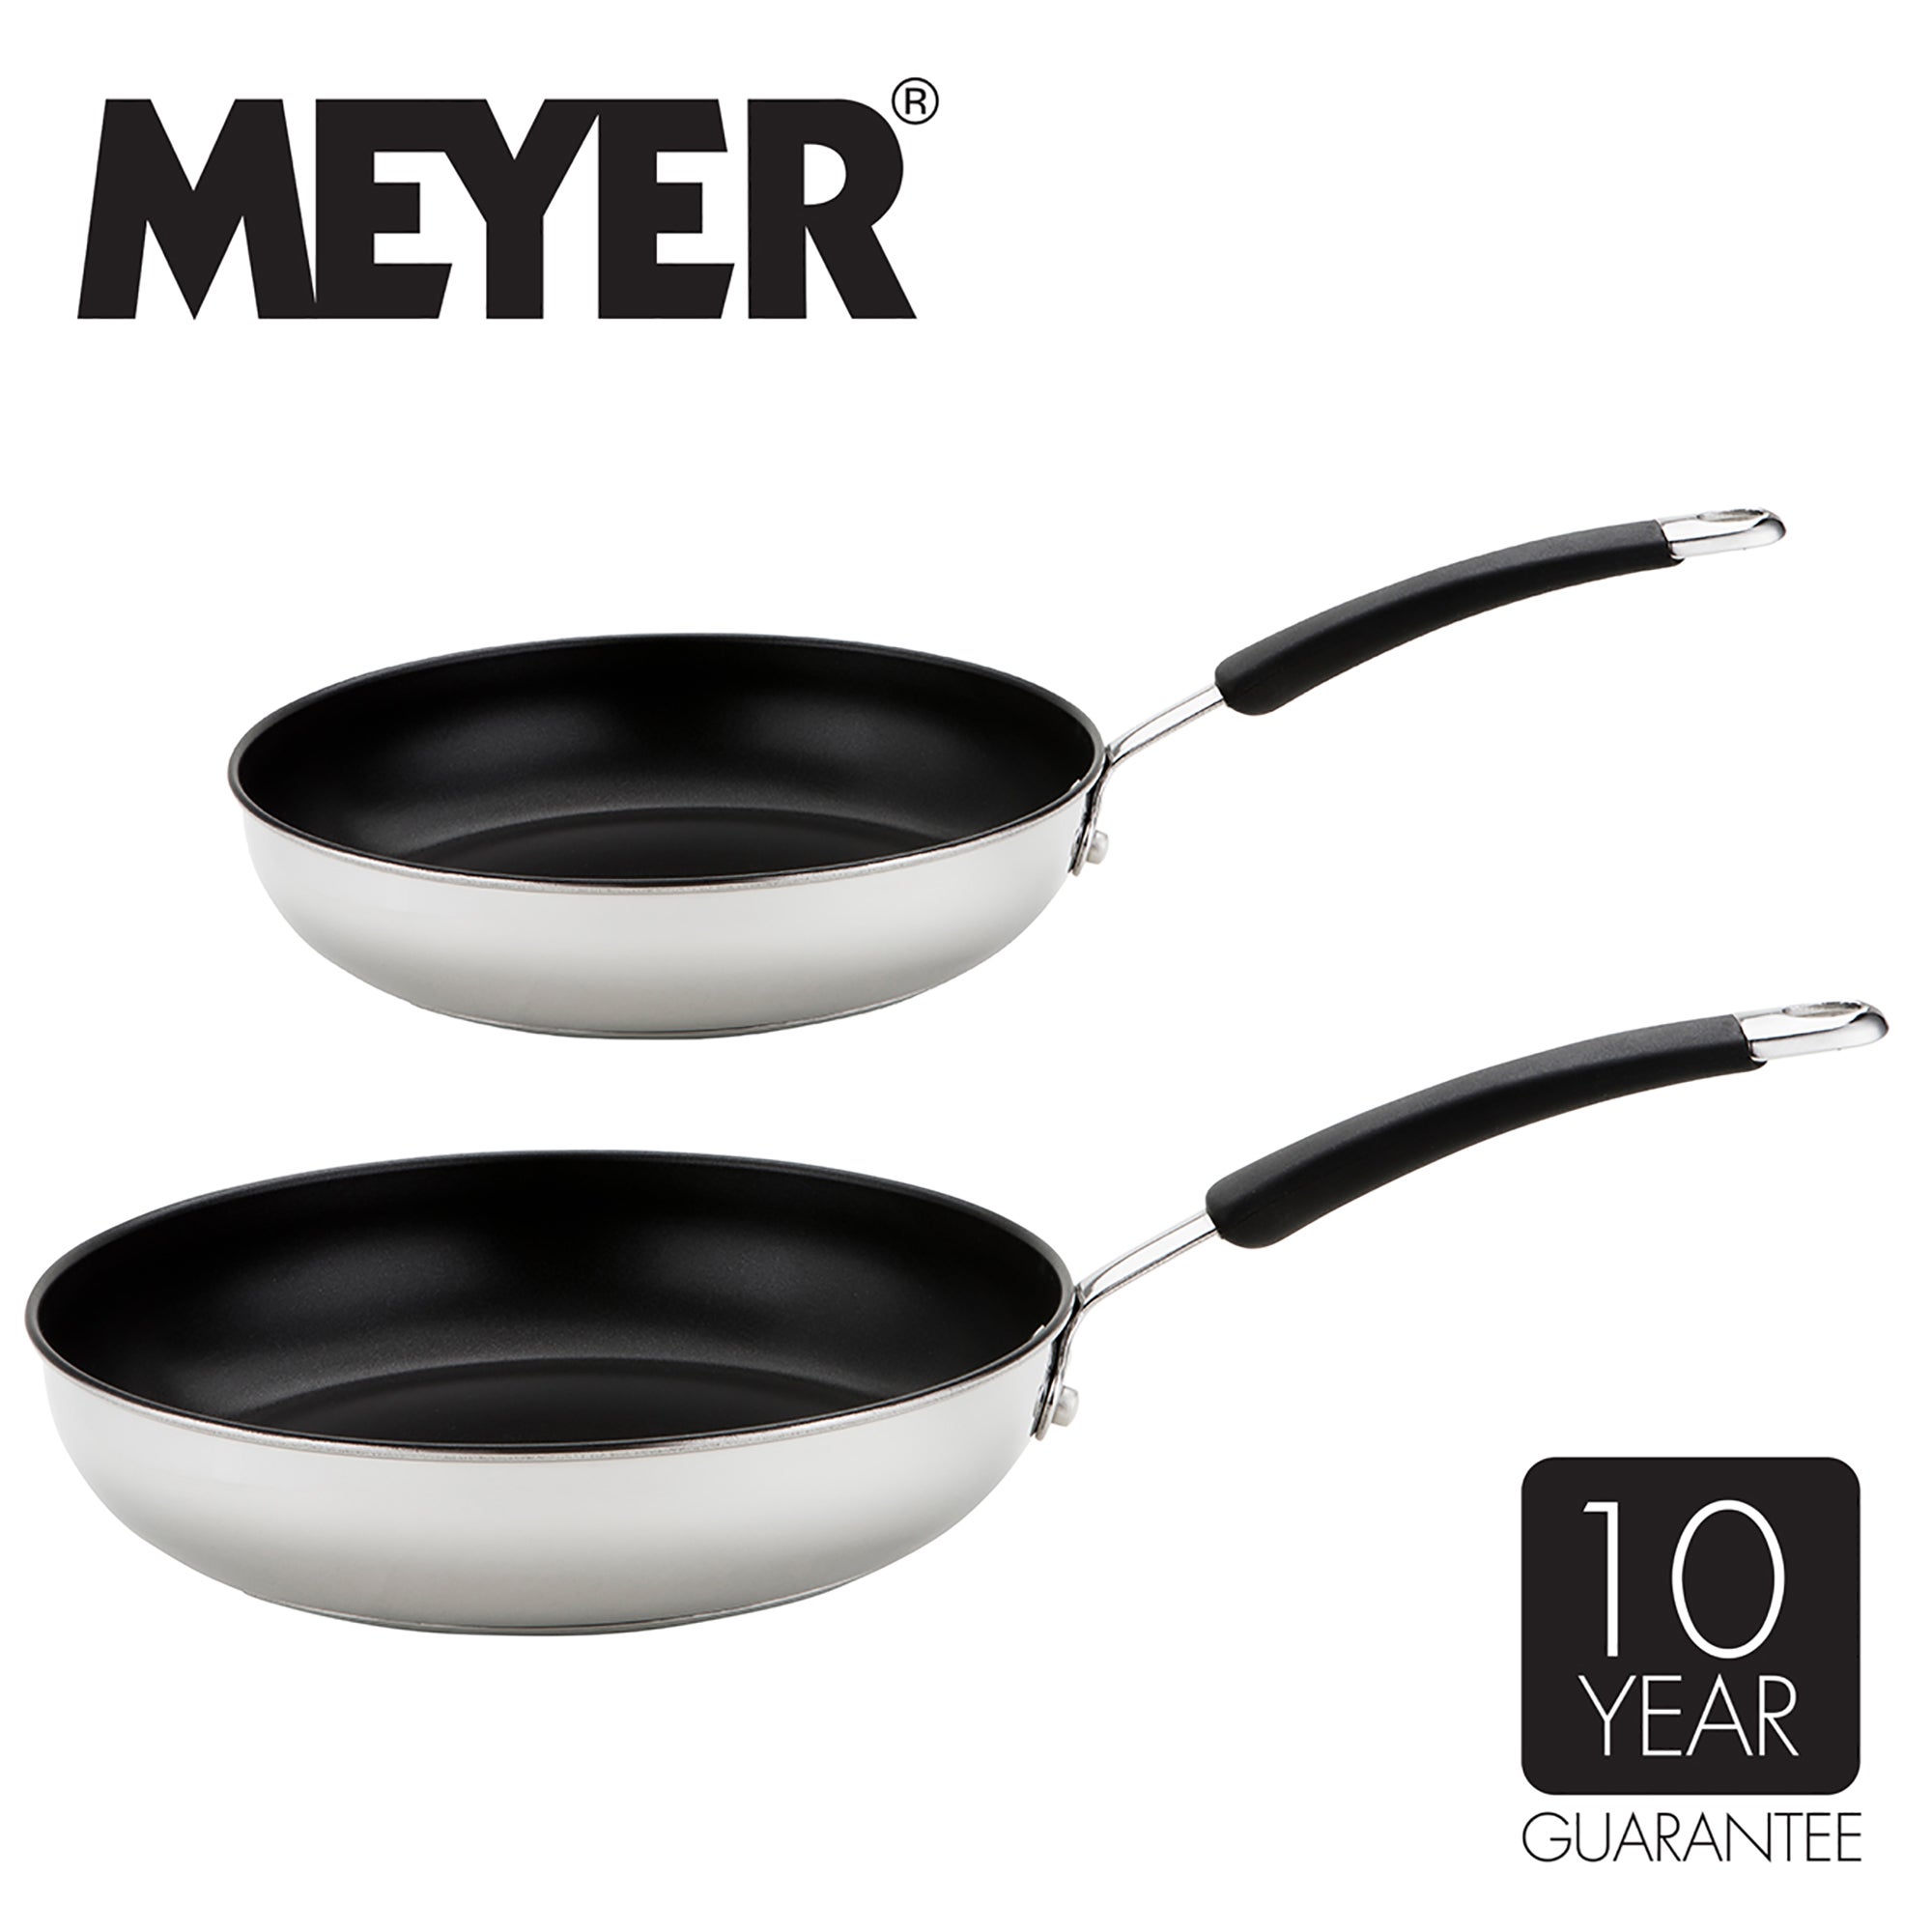 Meyer Induction Stainless Steel 2 Piece Frying Pan Set Black/Silver